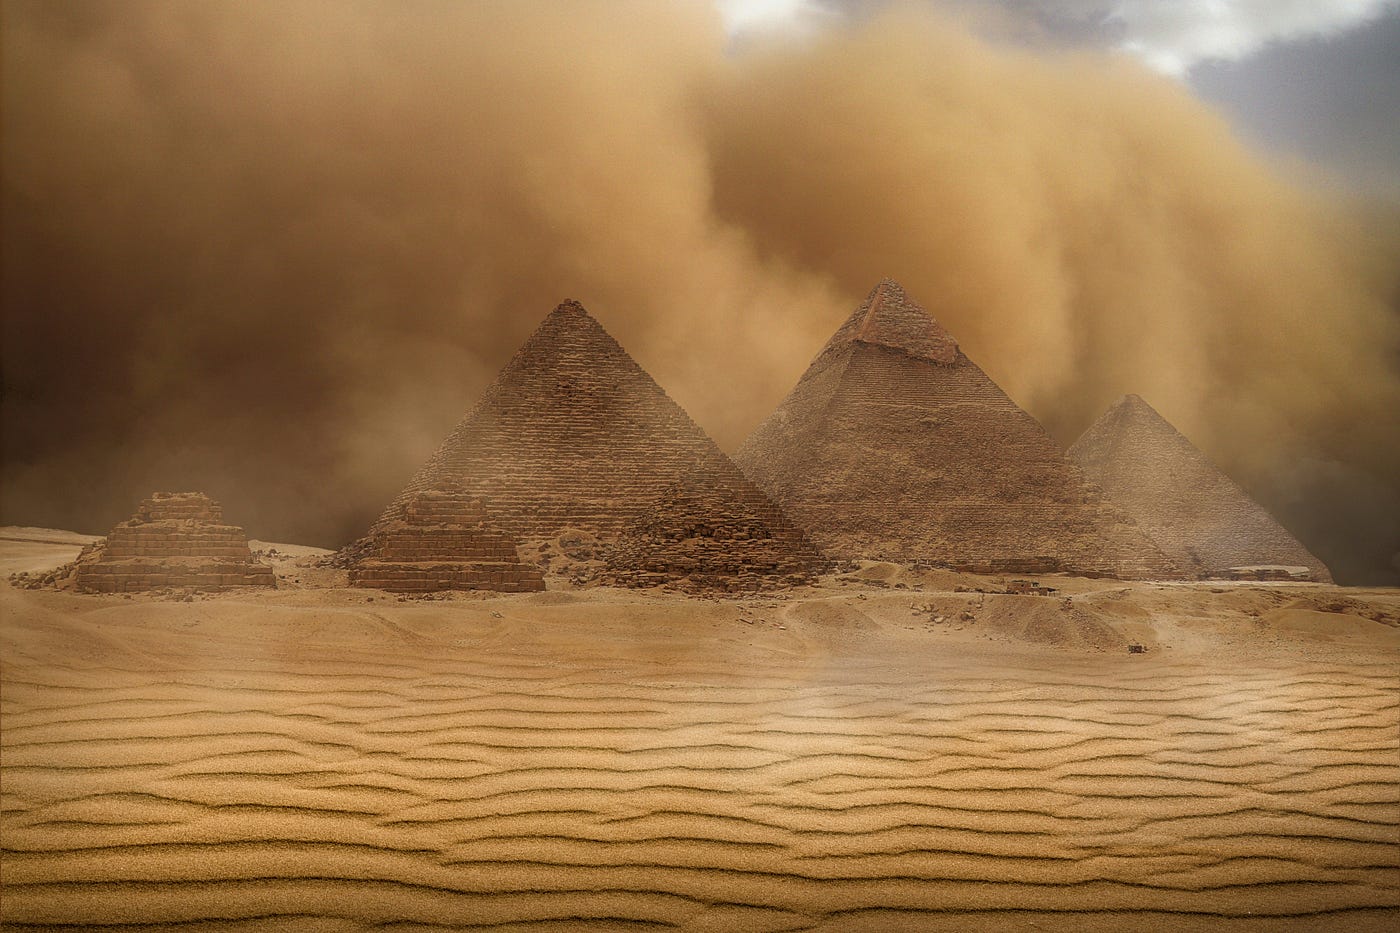 What's Inside the Pyramids of Giza